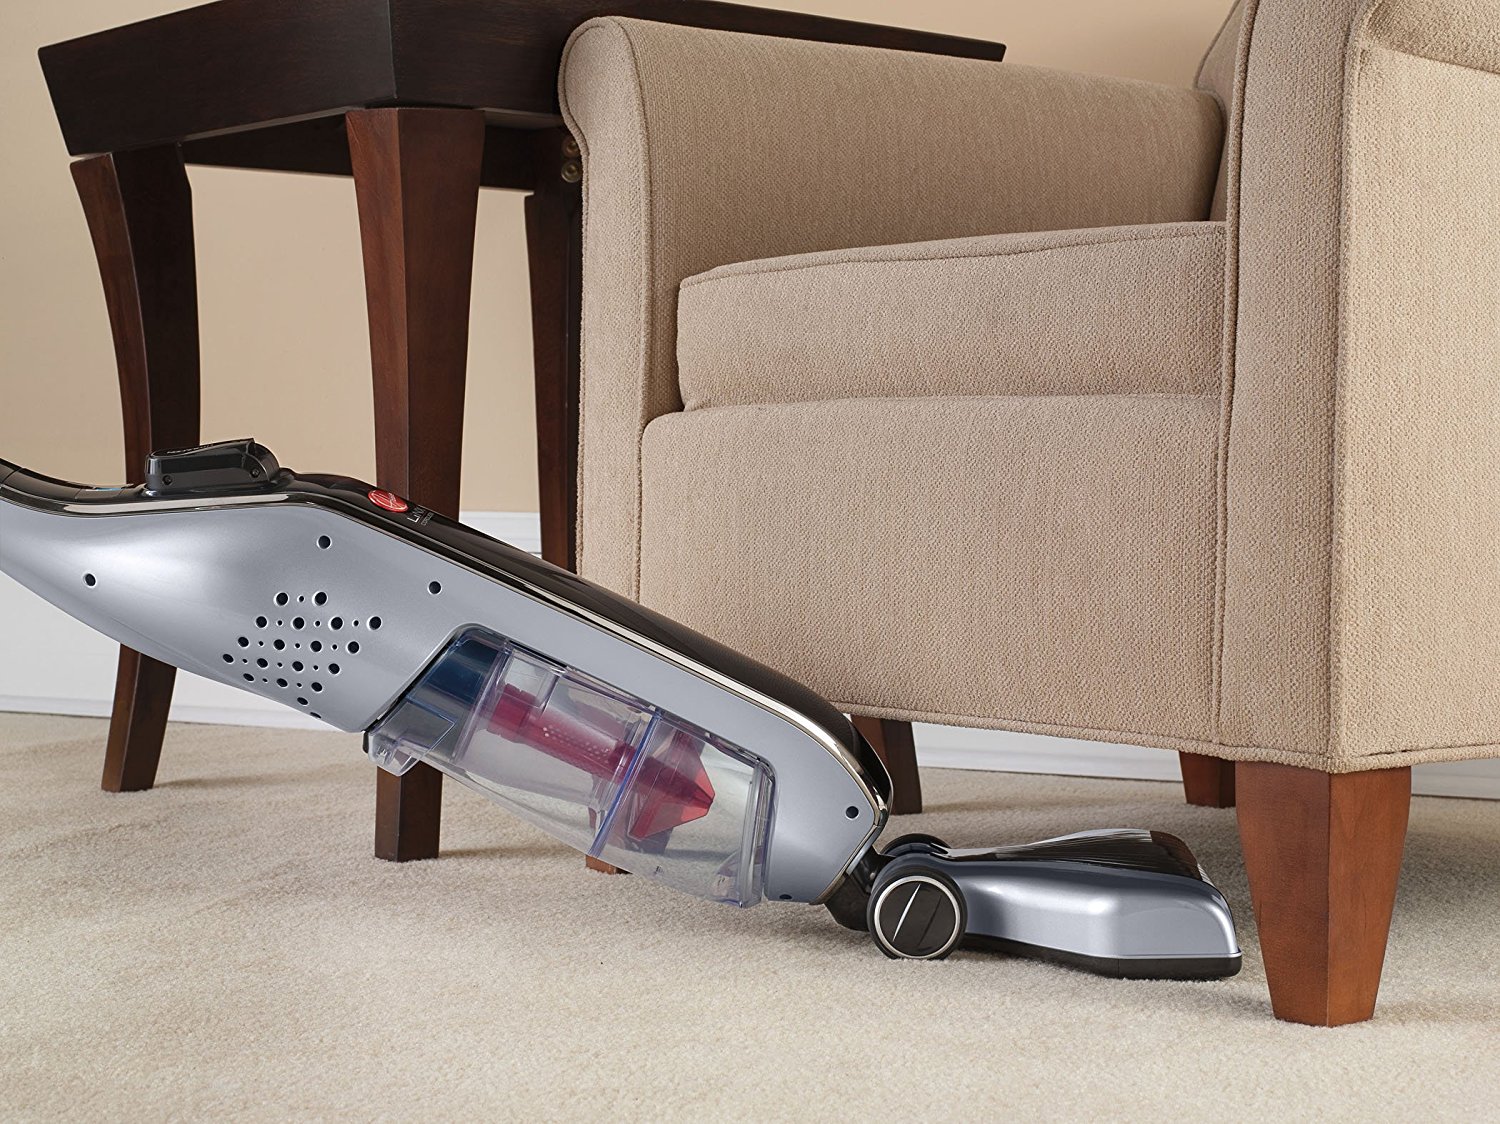 Hoover Linx BH50010 Cordless Stick Vacuum Cleaner under furniture